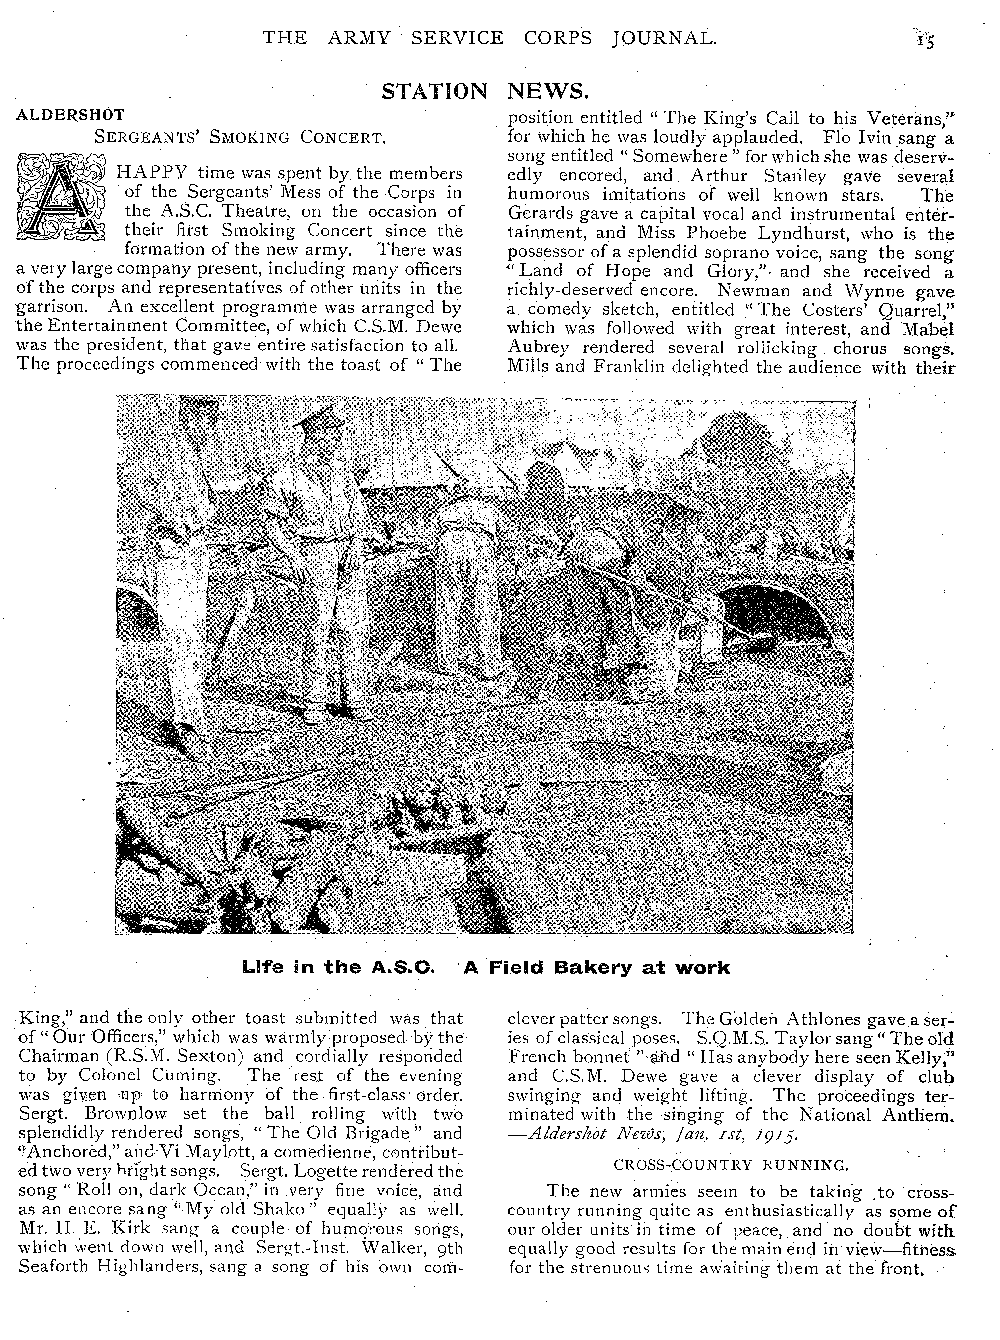 ASC Journal - 1915, page 15